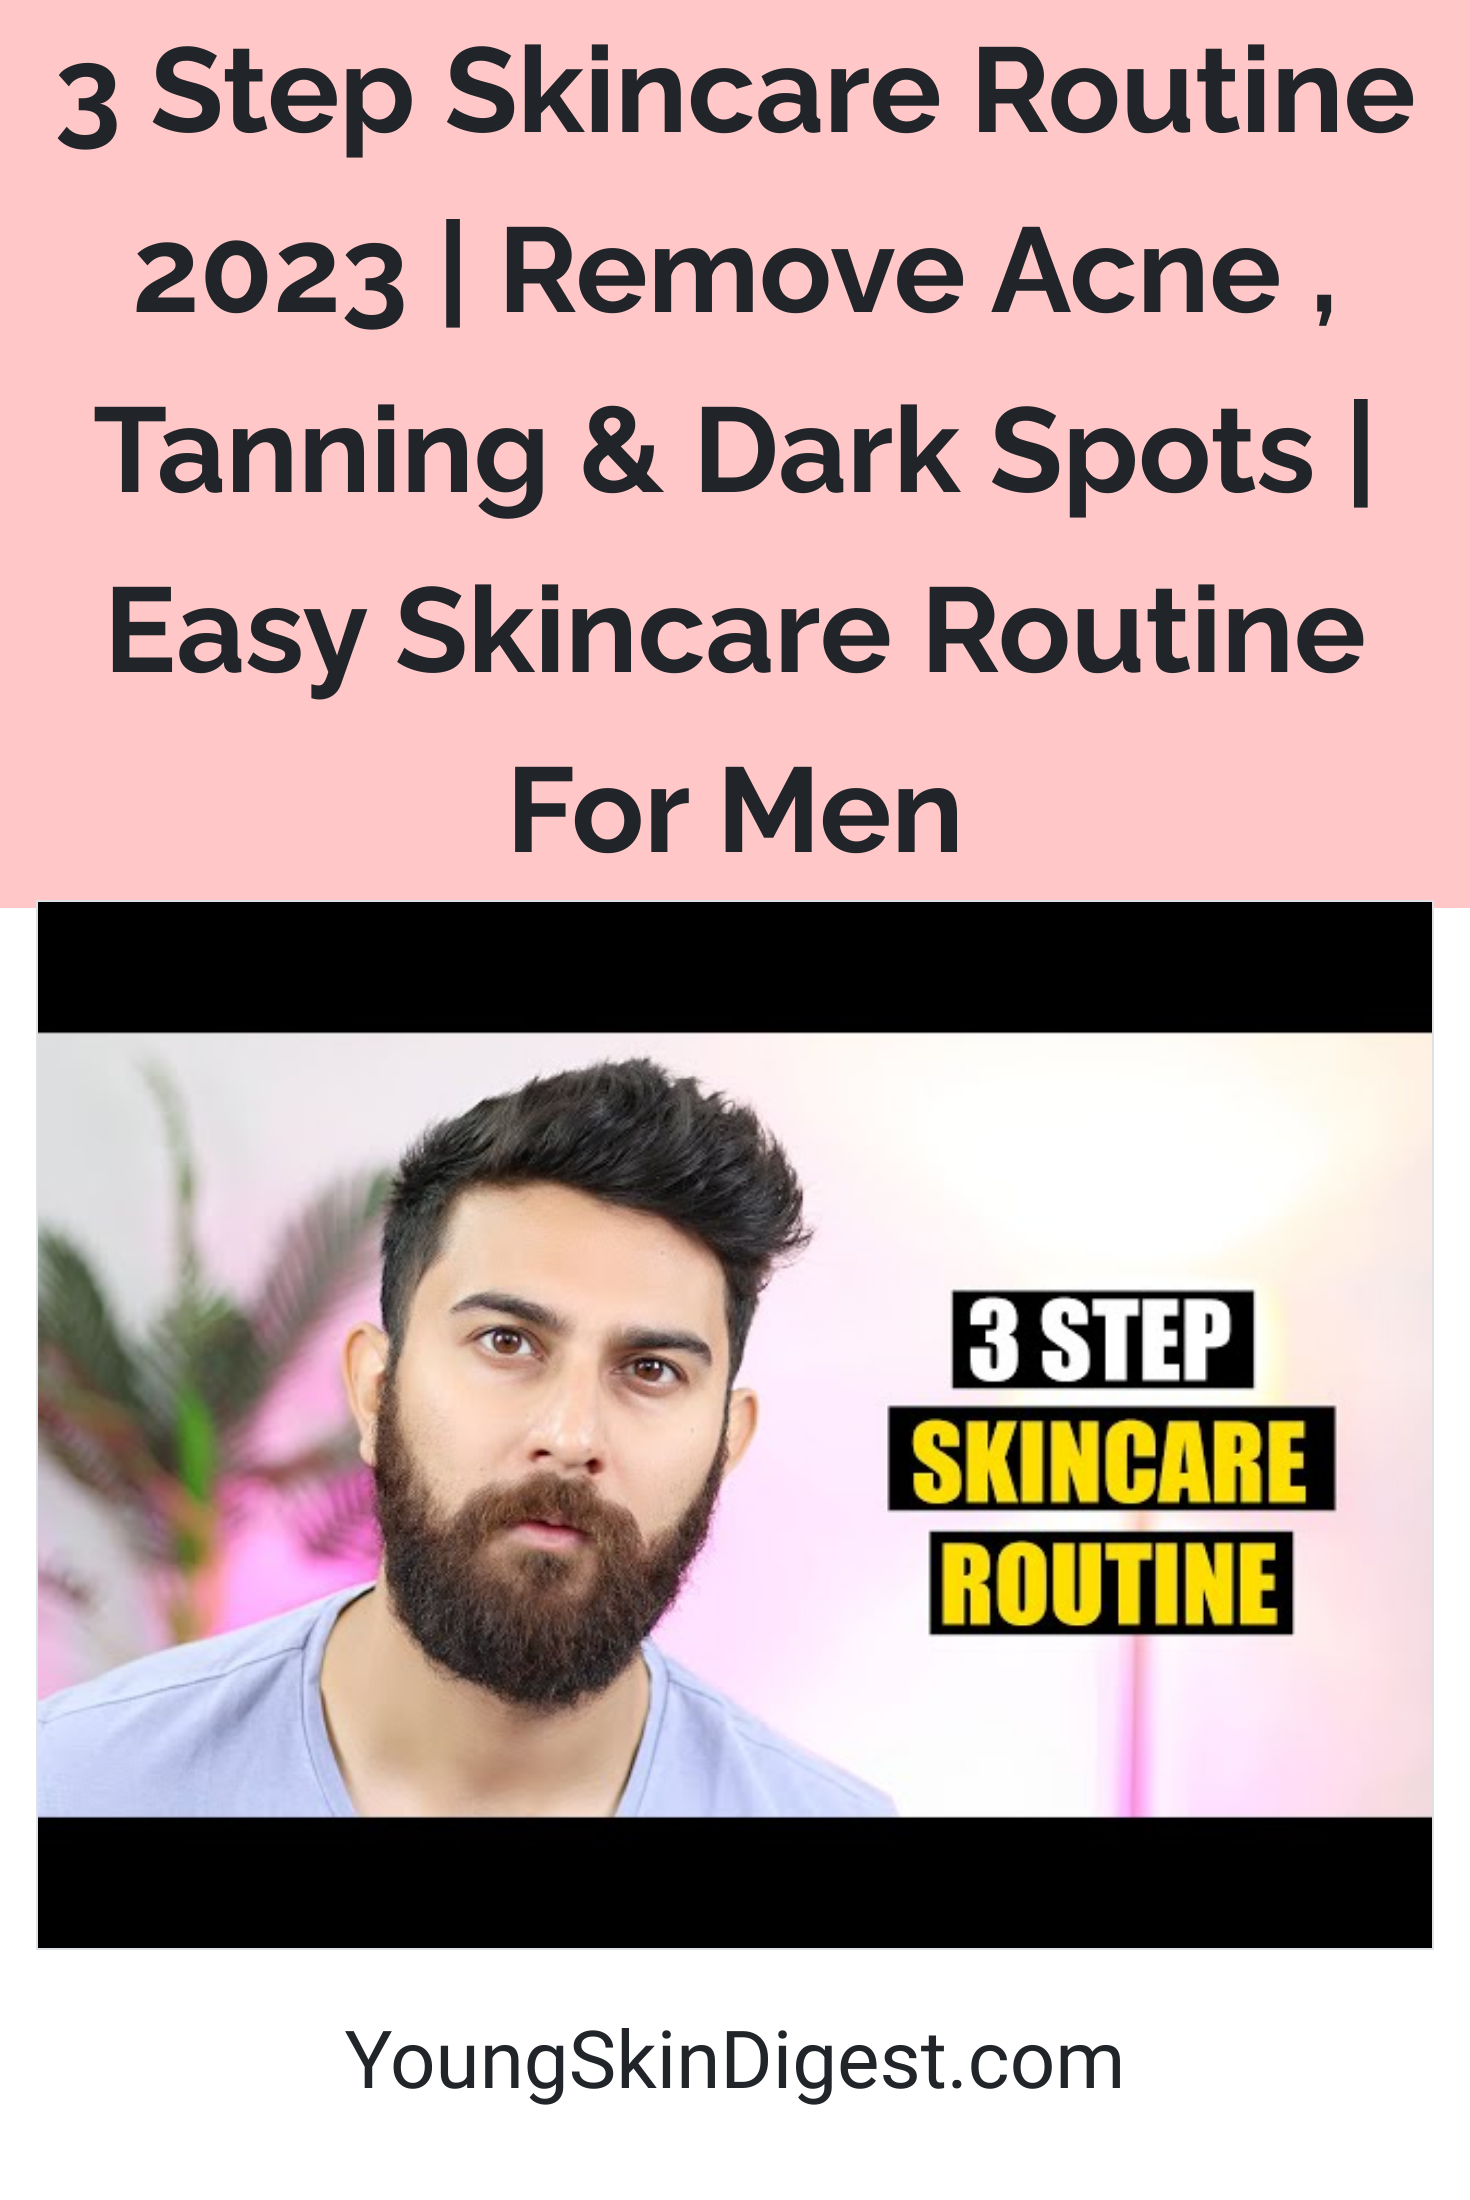 3 Step Skincare Routine 2023 Remove Acne Tanning And Dark Spots Easy Skincare Routine For